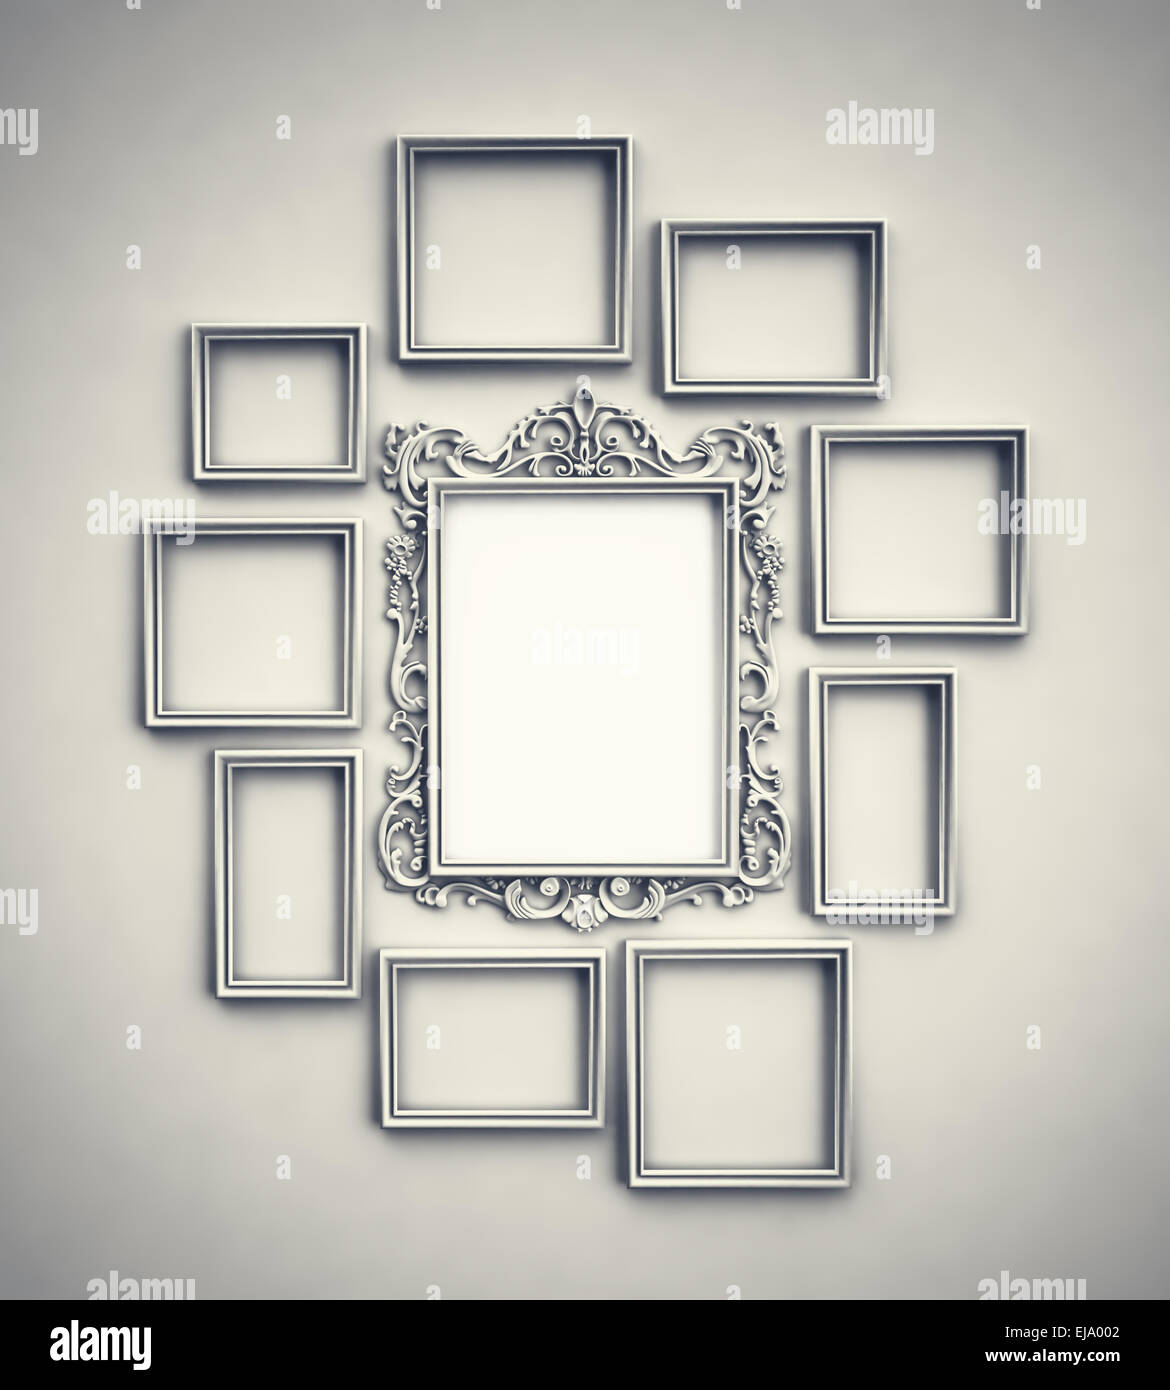 Wall with simple frames surrounding ornamented frame in the middle Stock Photo